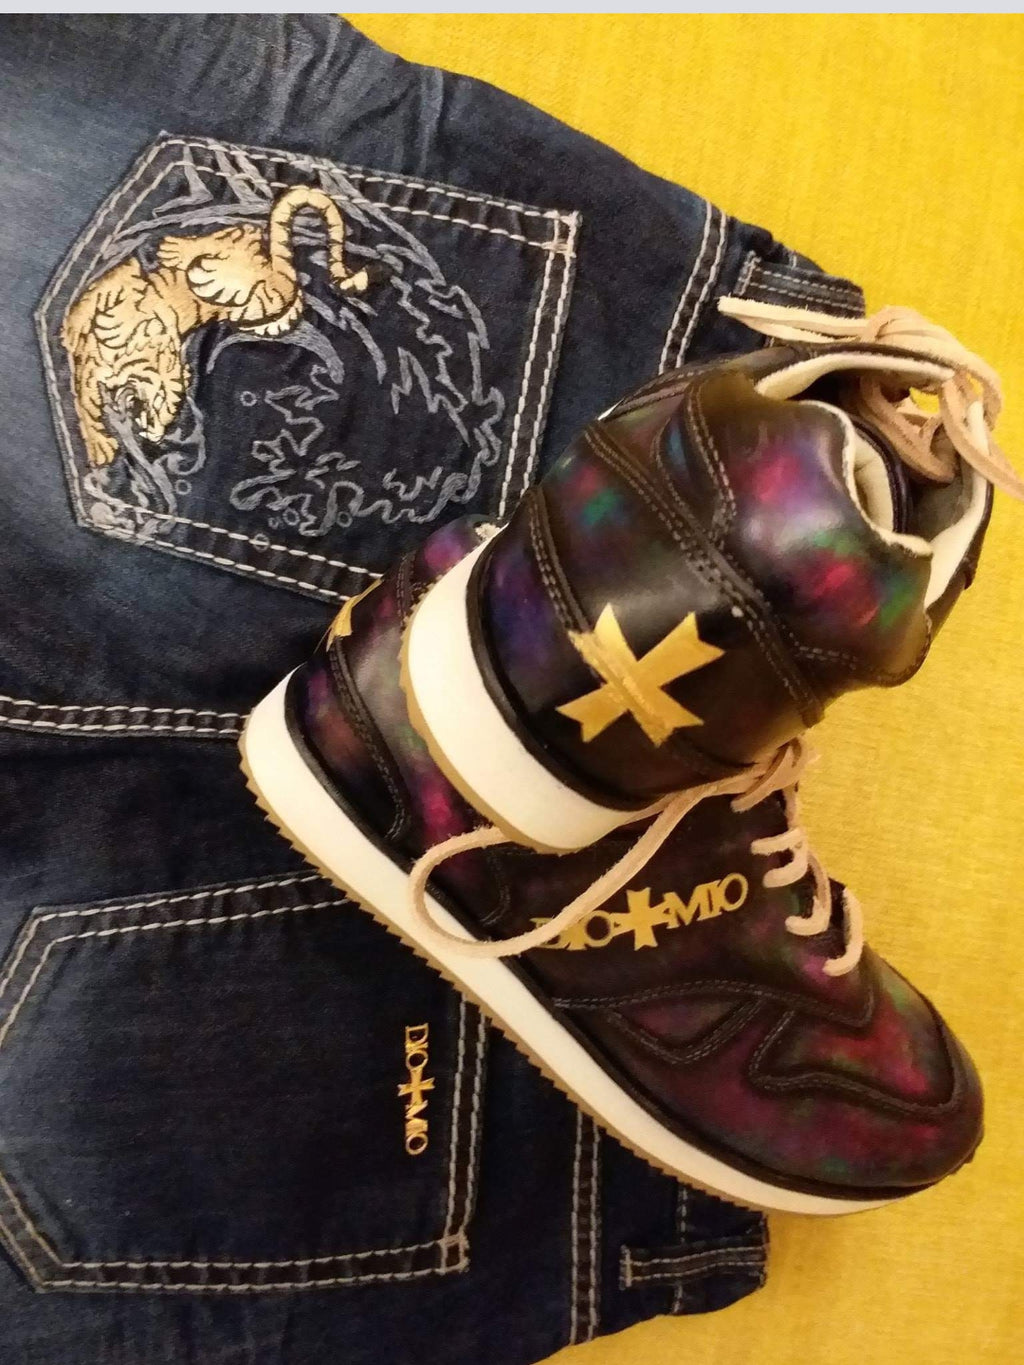 DIO+MIO Jeans and Shoes Special Edition